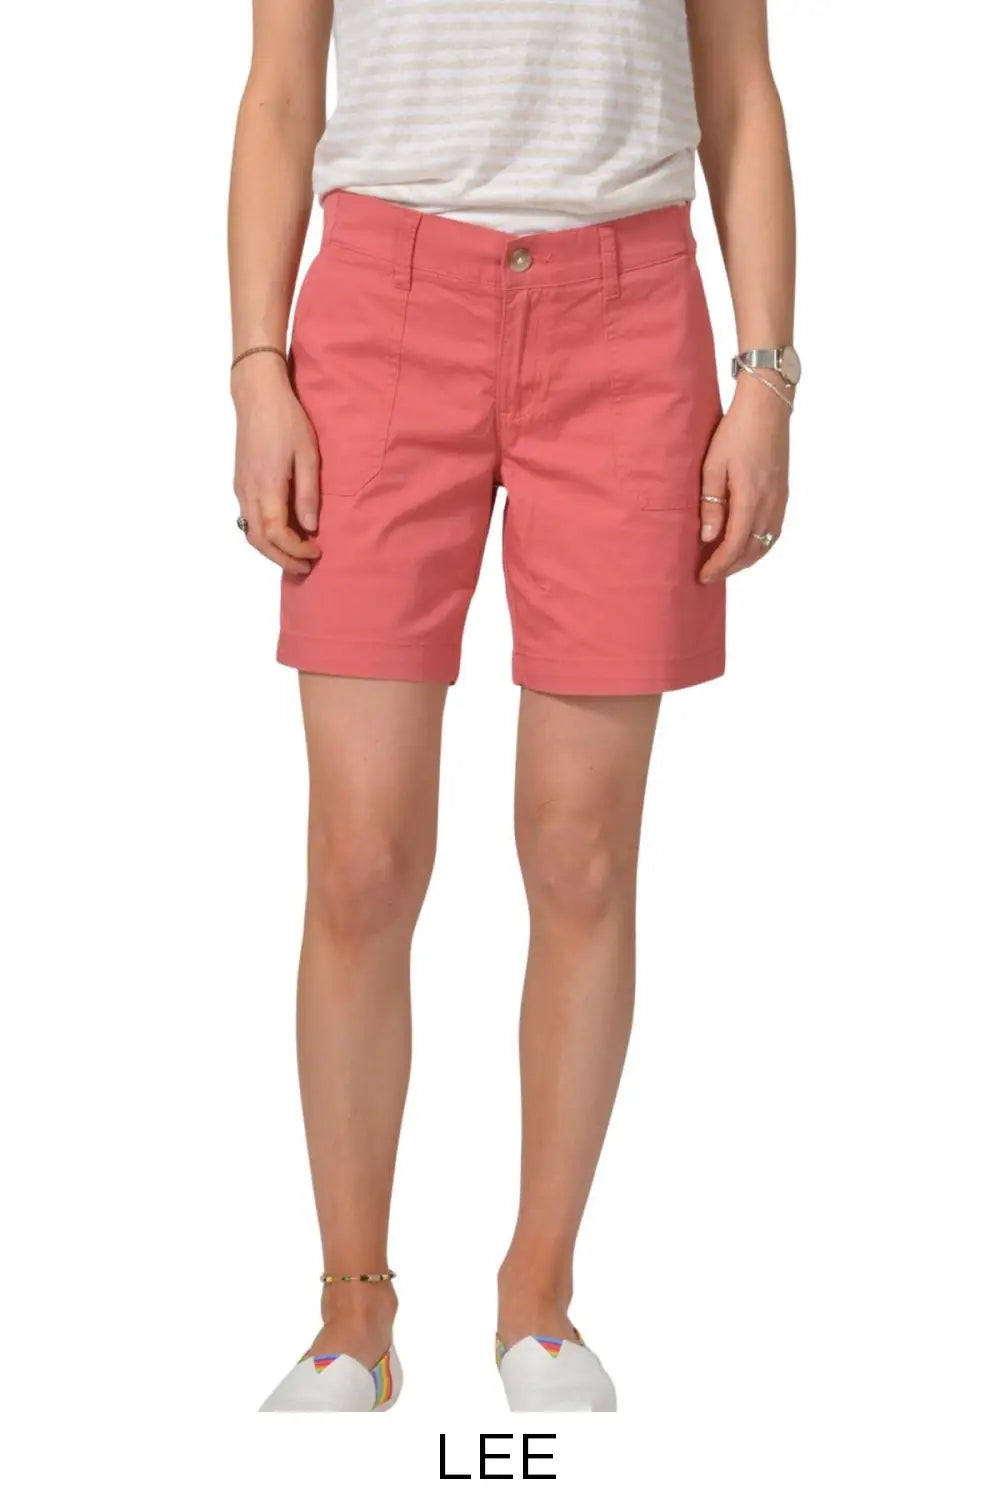 Lee Comfort Fit Chino Shorts Pink / 10